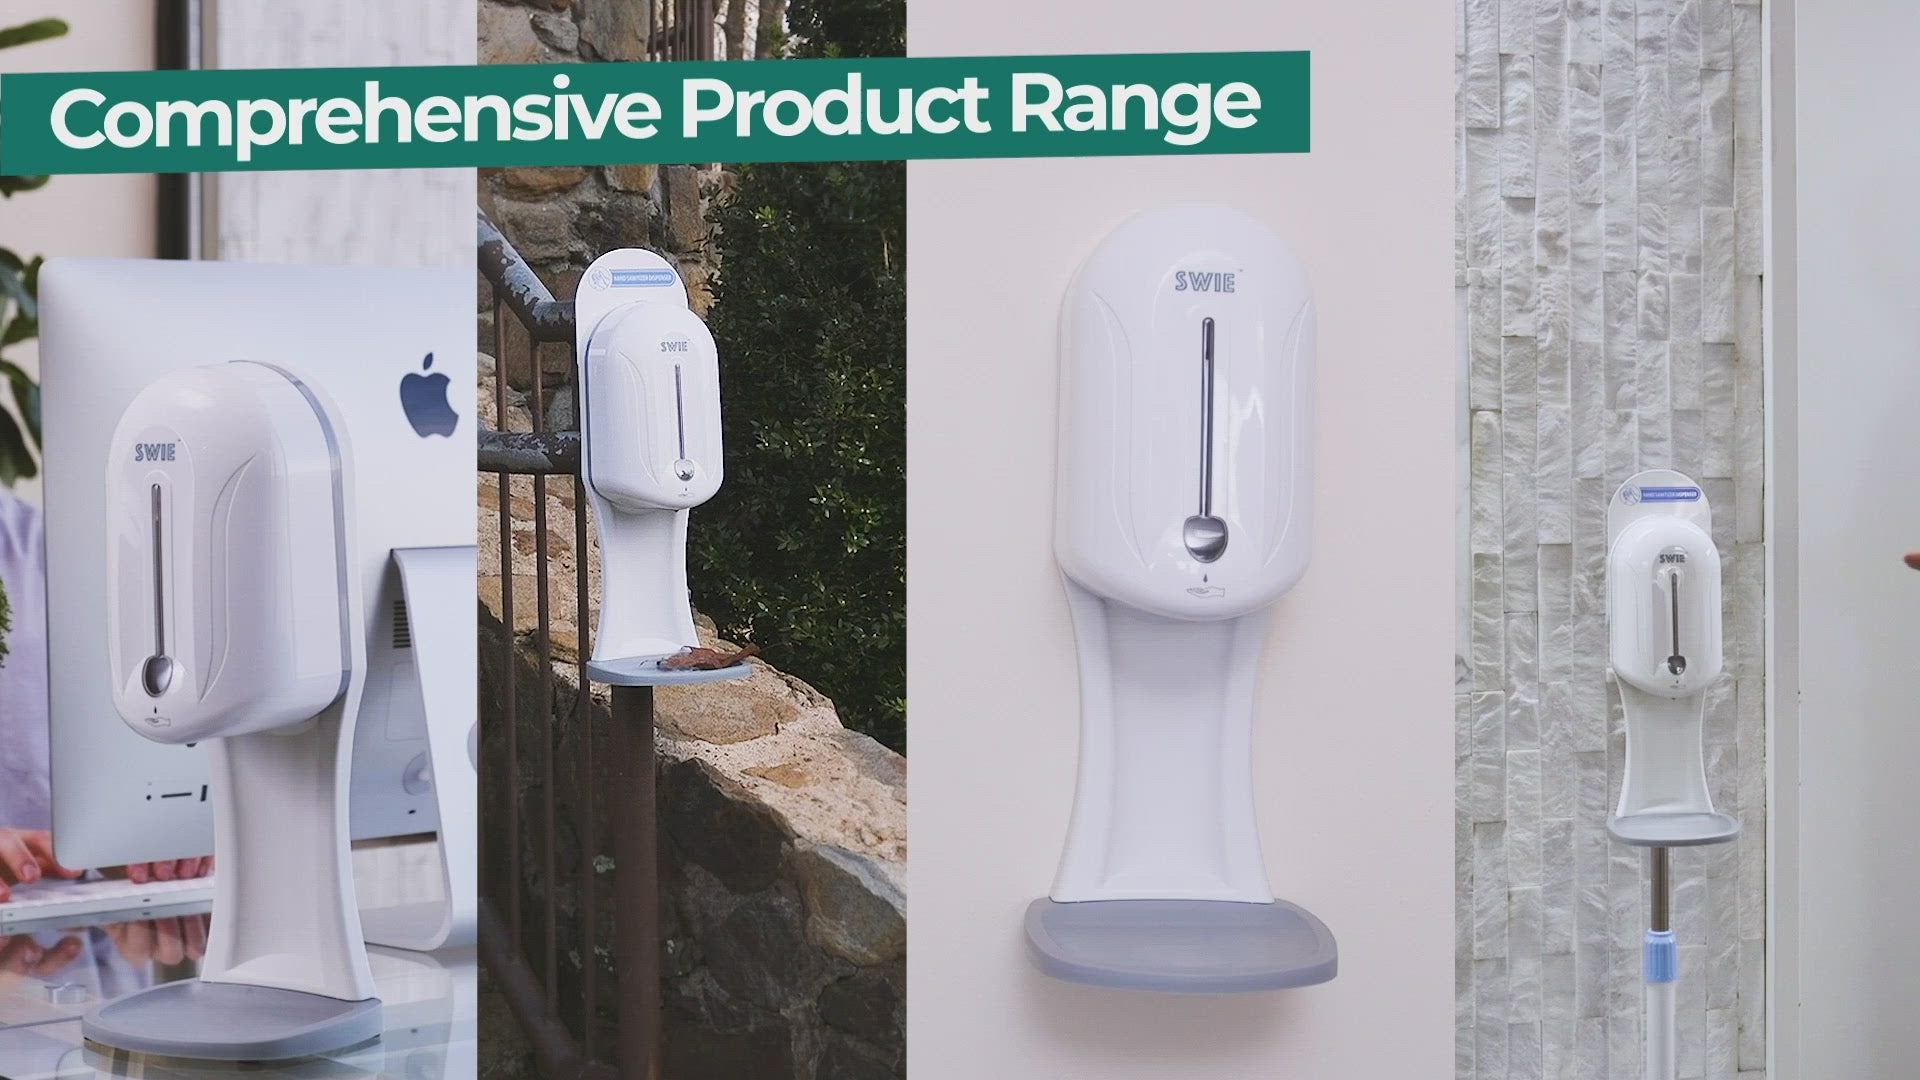 ALL-Weather Automatic Hand Sanitizer/Soap Dispenser, Rain, Snow & Waterproof, Outdoor/Indoor, Pole Mounted